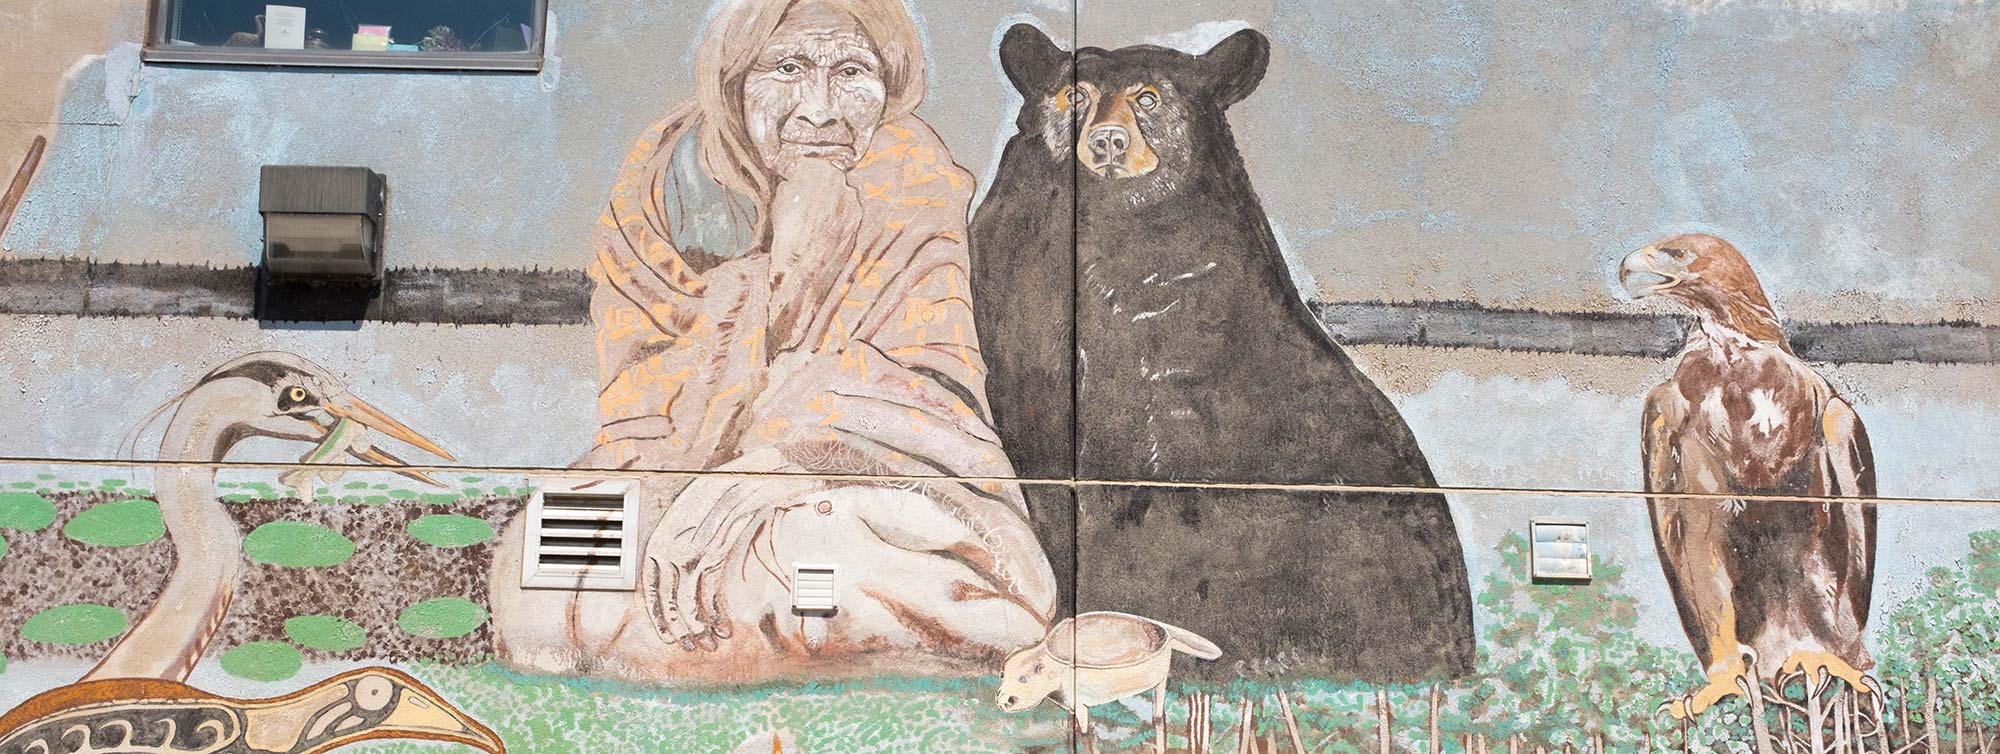 Indigenous art wall mural in Rama, Ontario showing an Elder, black bear, and an eagle